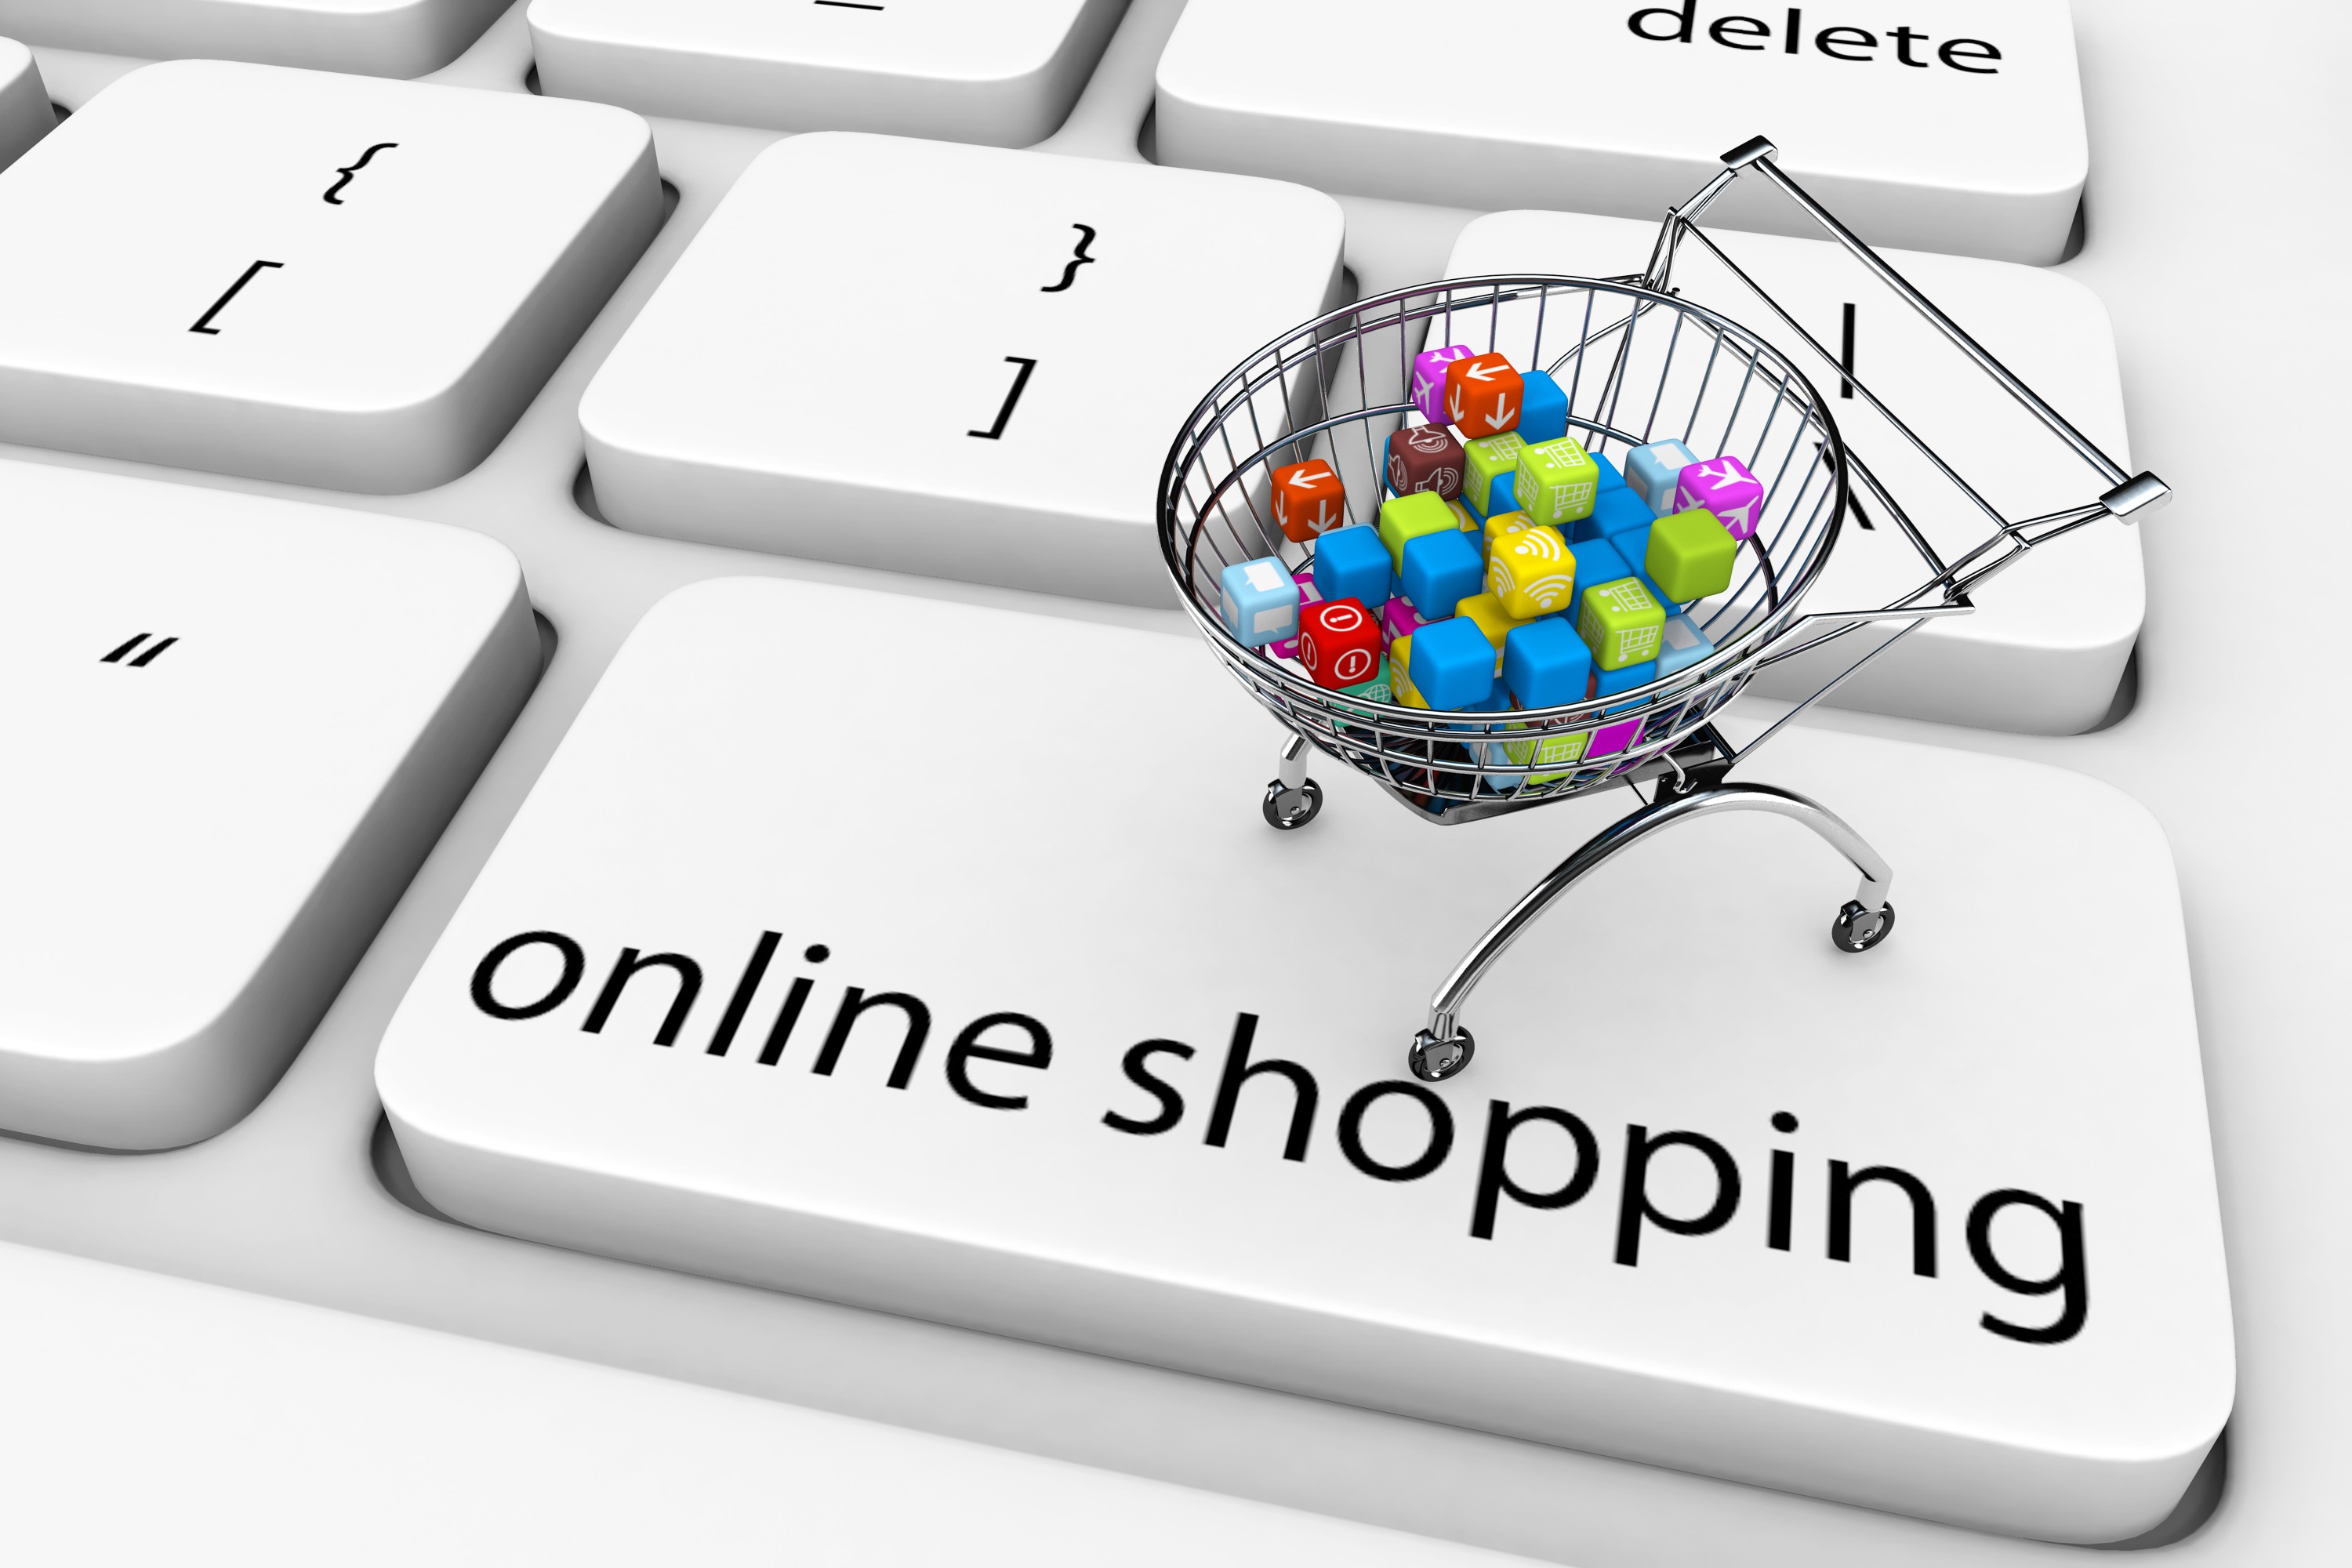 Consumers Value Privacy But Are Still Shopping Online, Study Finds 